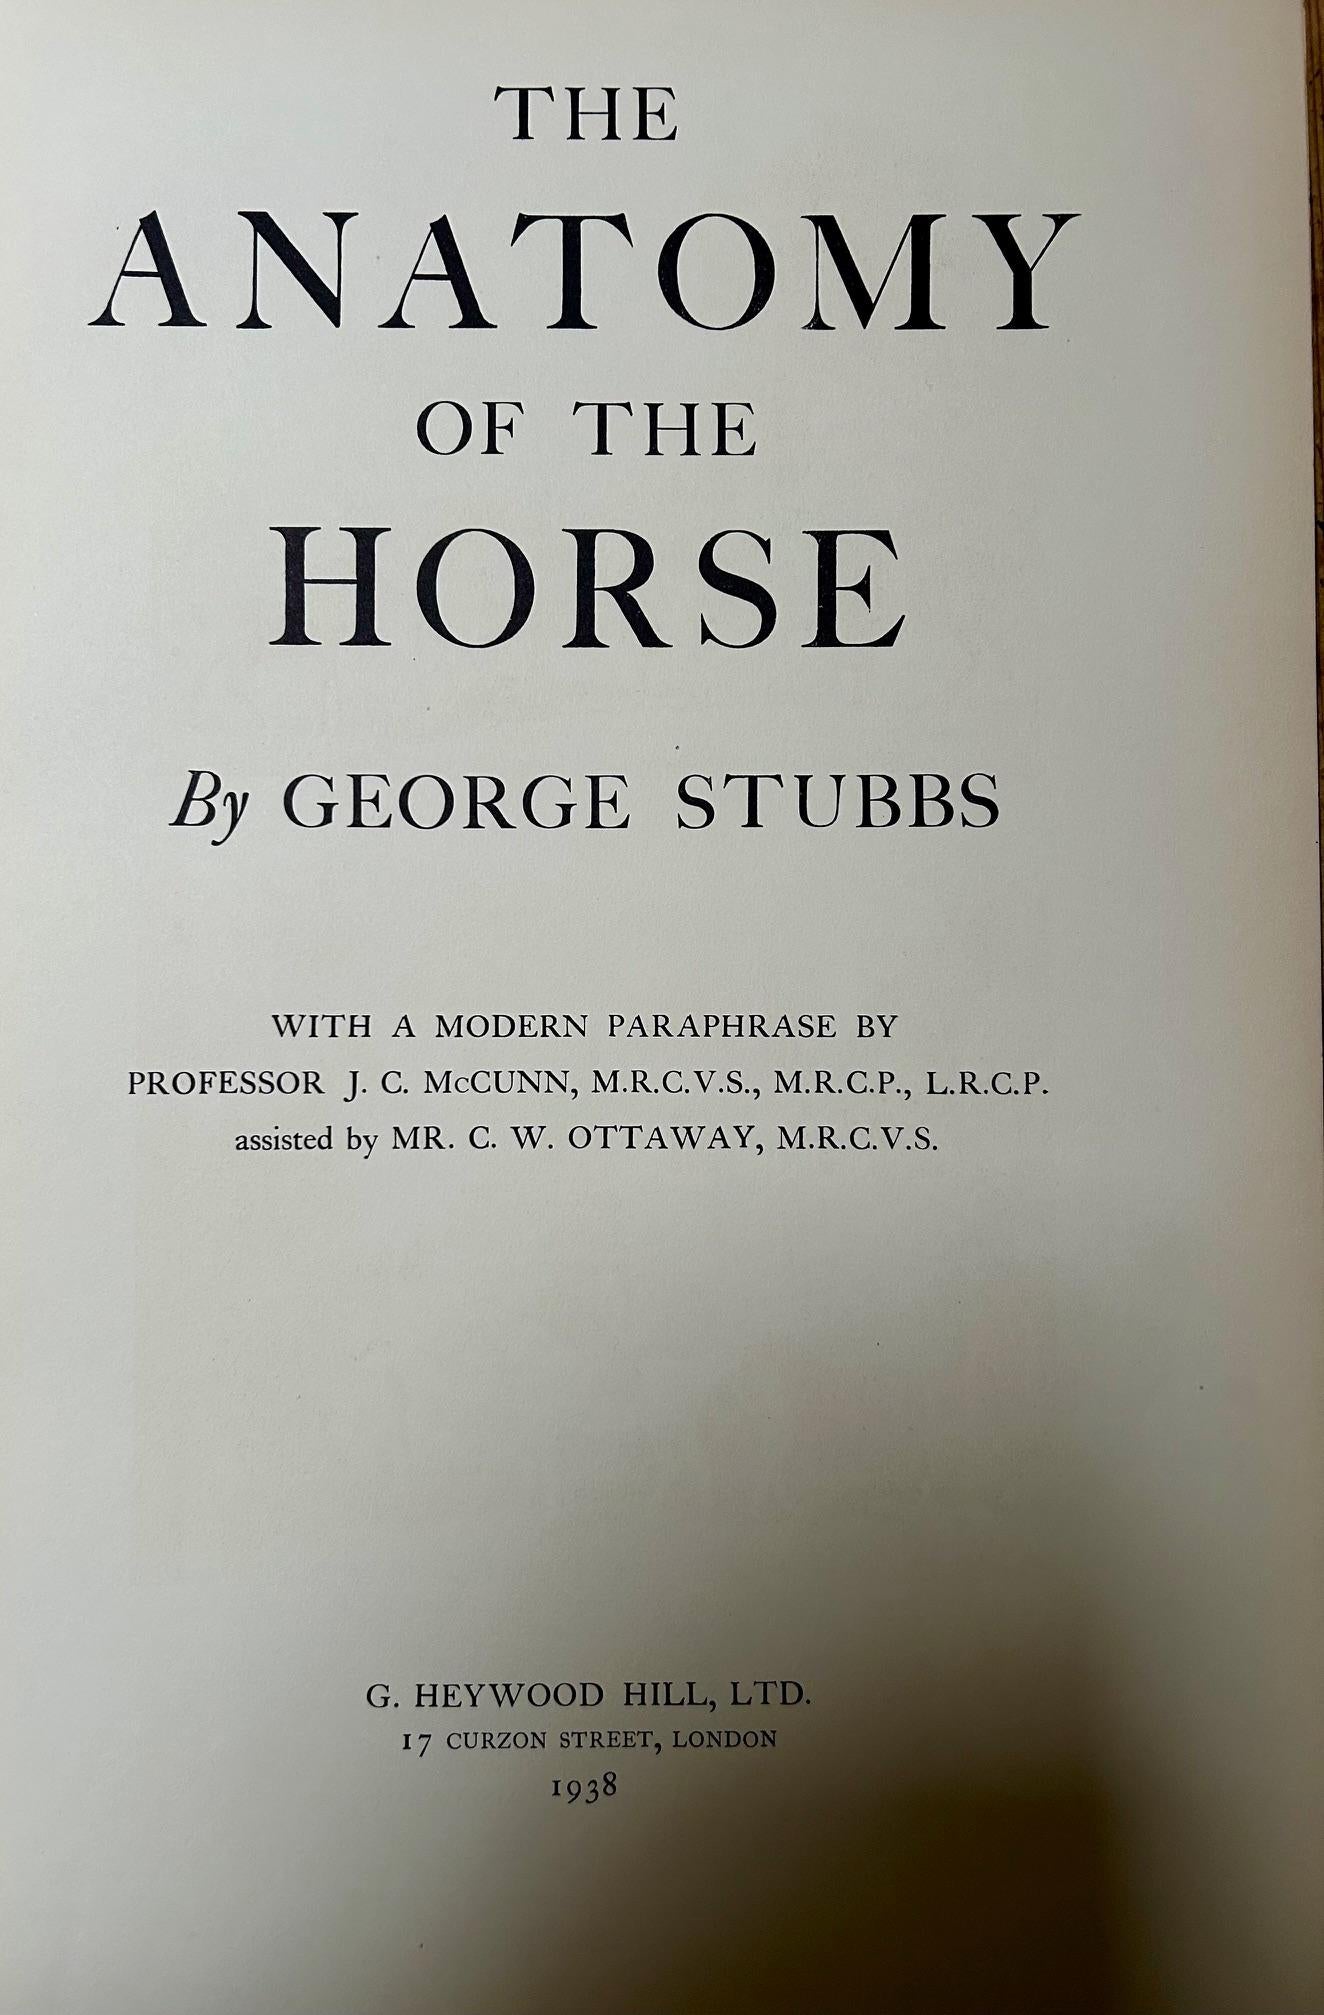 British George Stubbs - Anatomy of the Horse 1938 For Sale